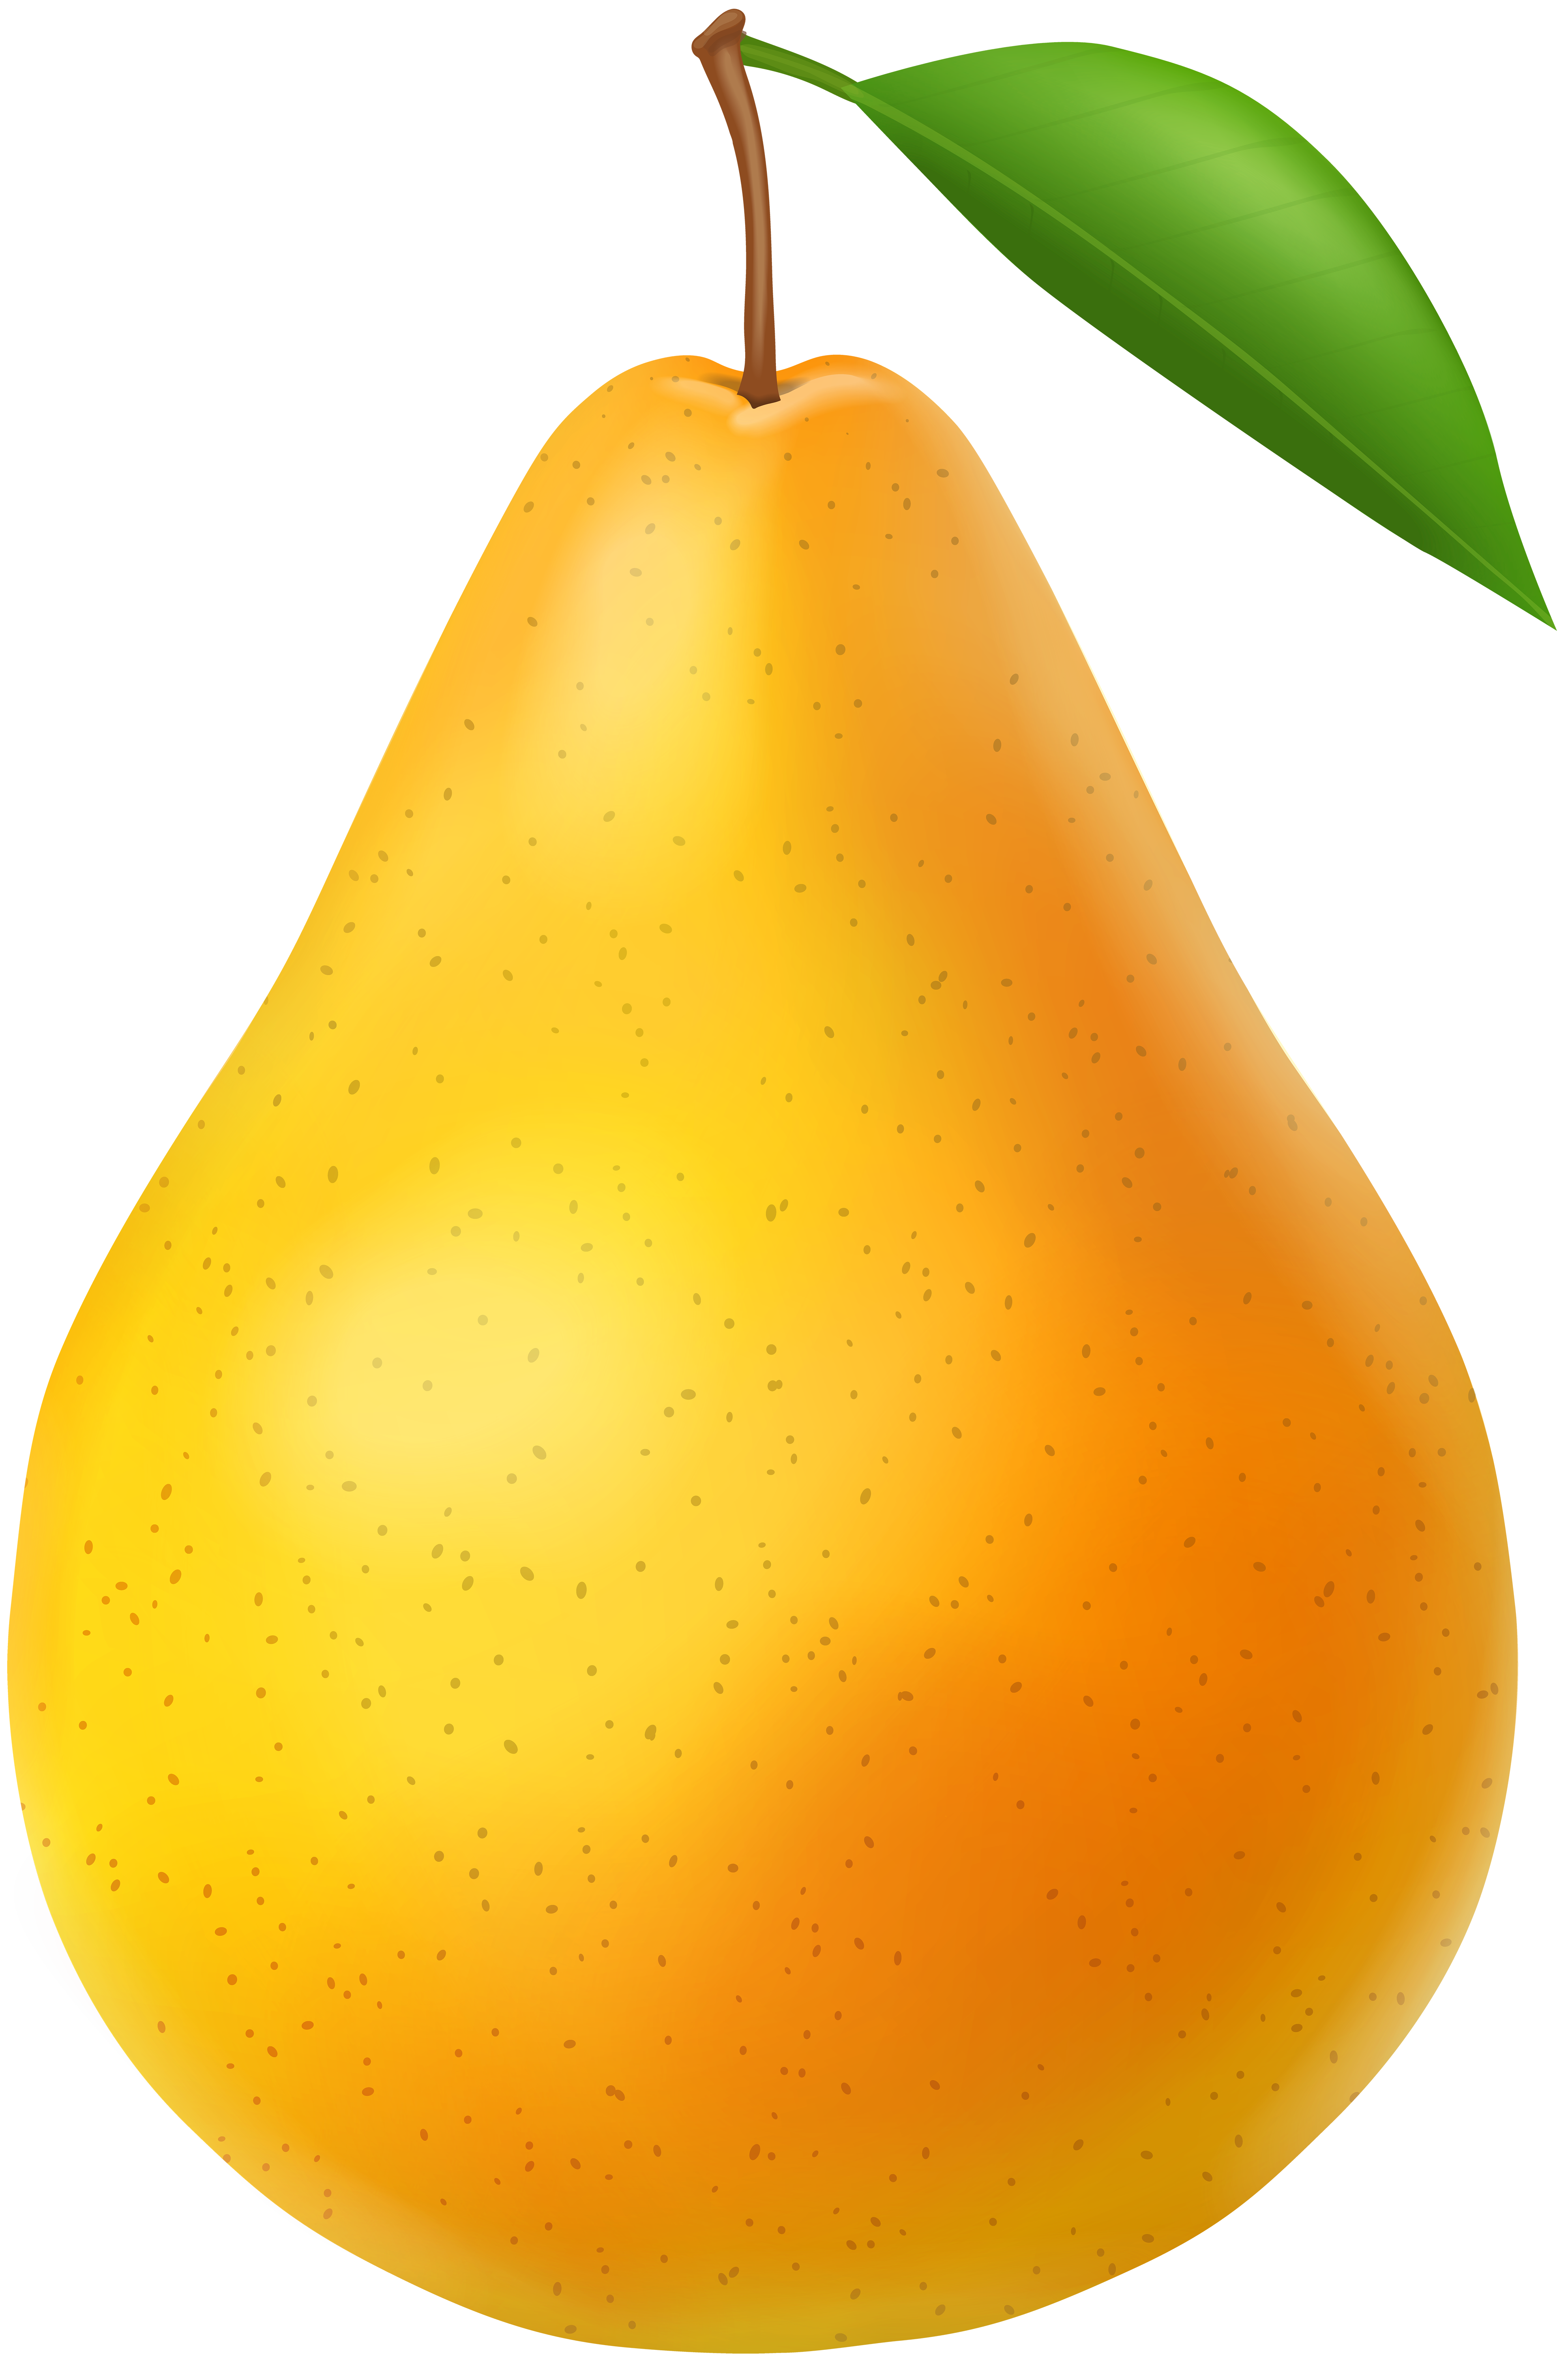 Pear Wallpaper (62+ images)